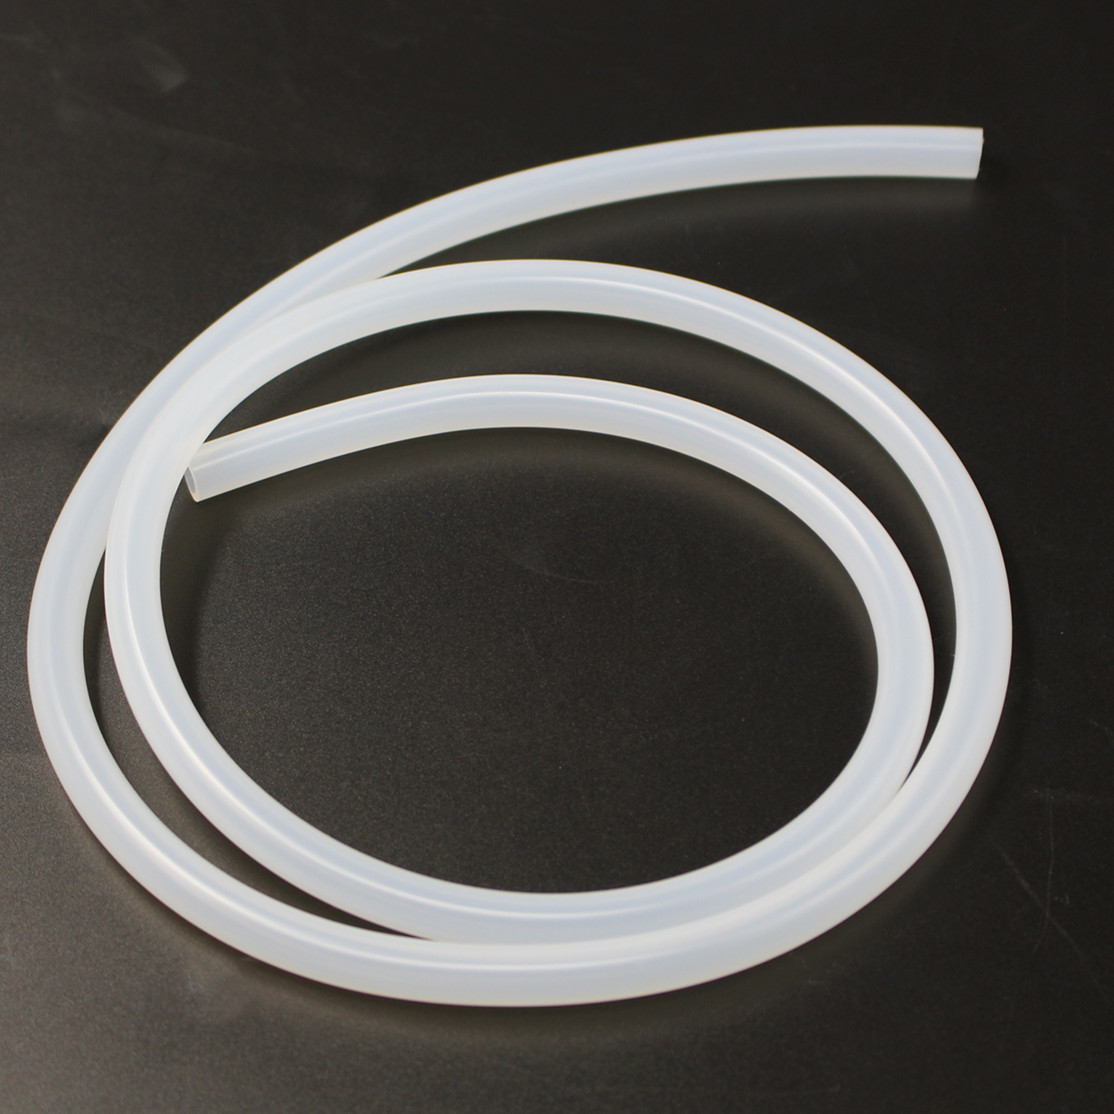 China Supplier Customize Food Grade Silicone Rubber Hose Clear Silicone Tube